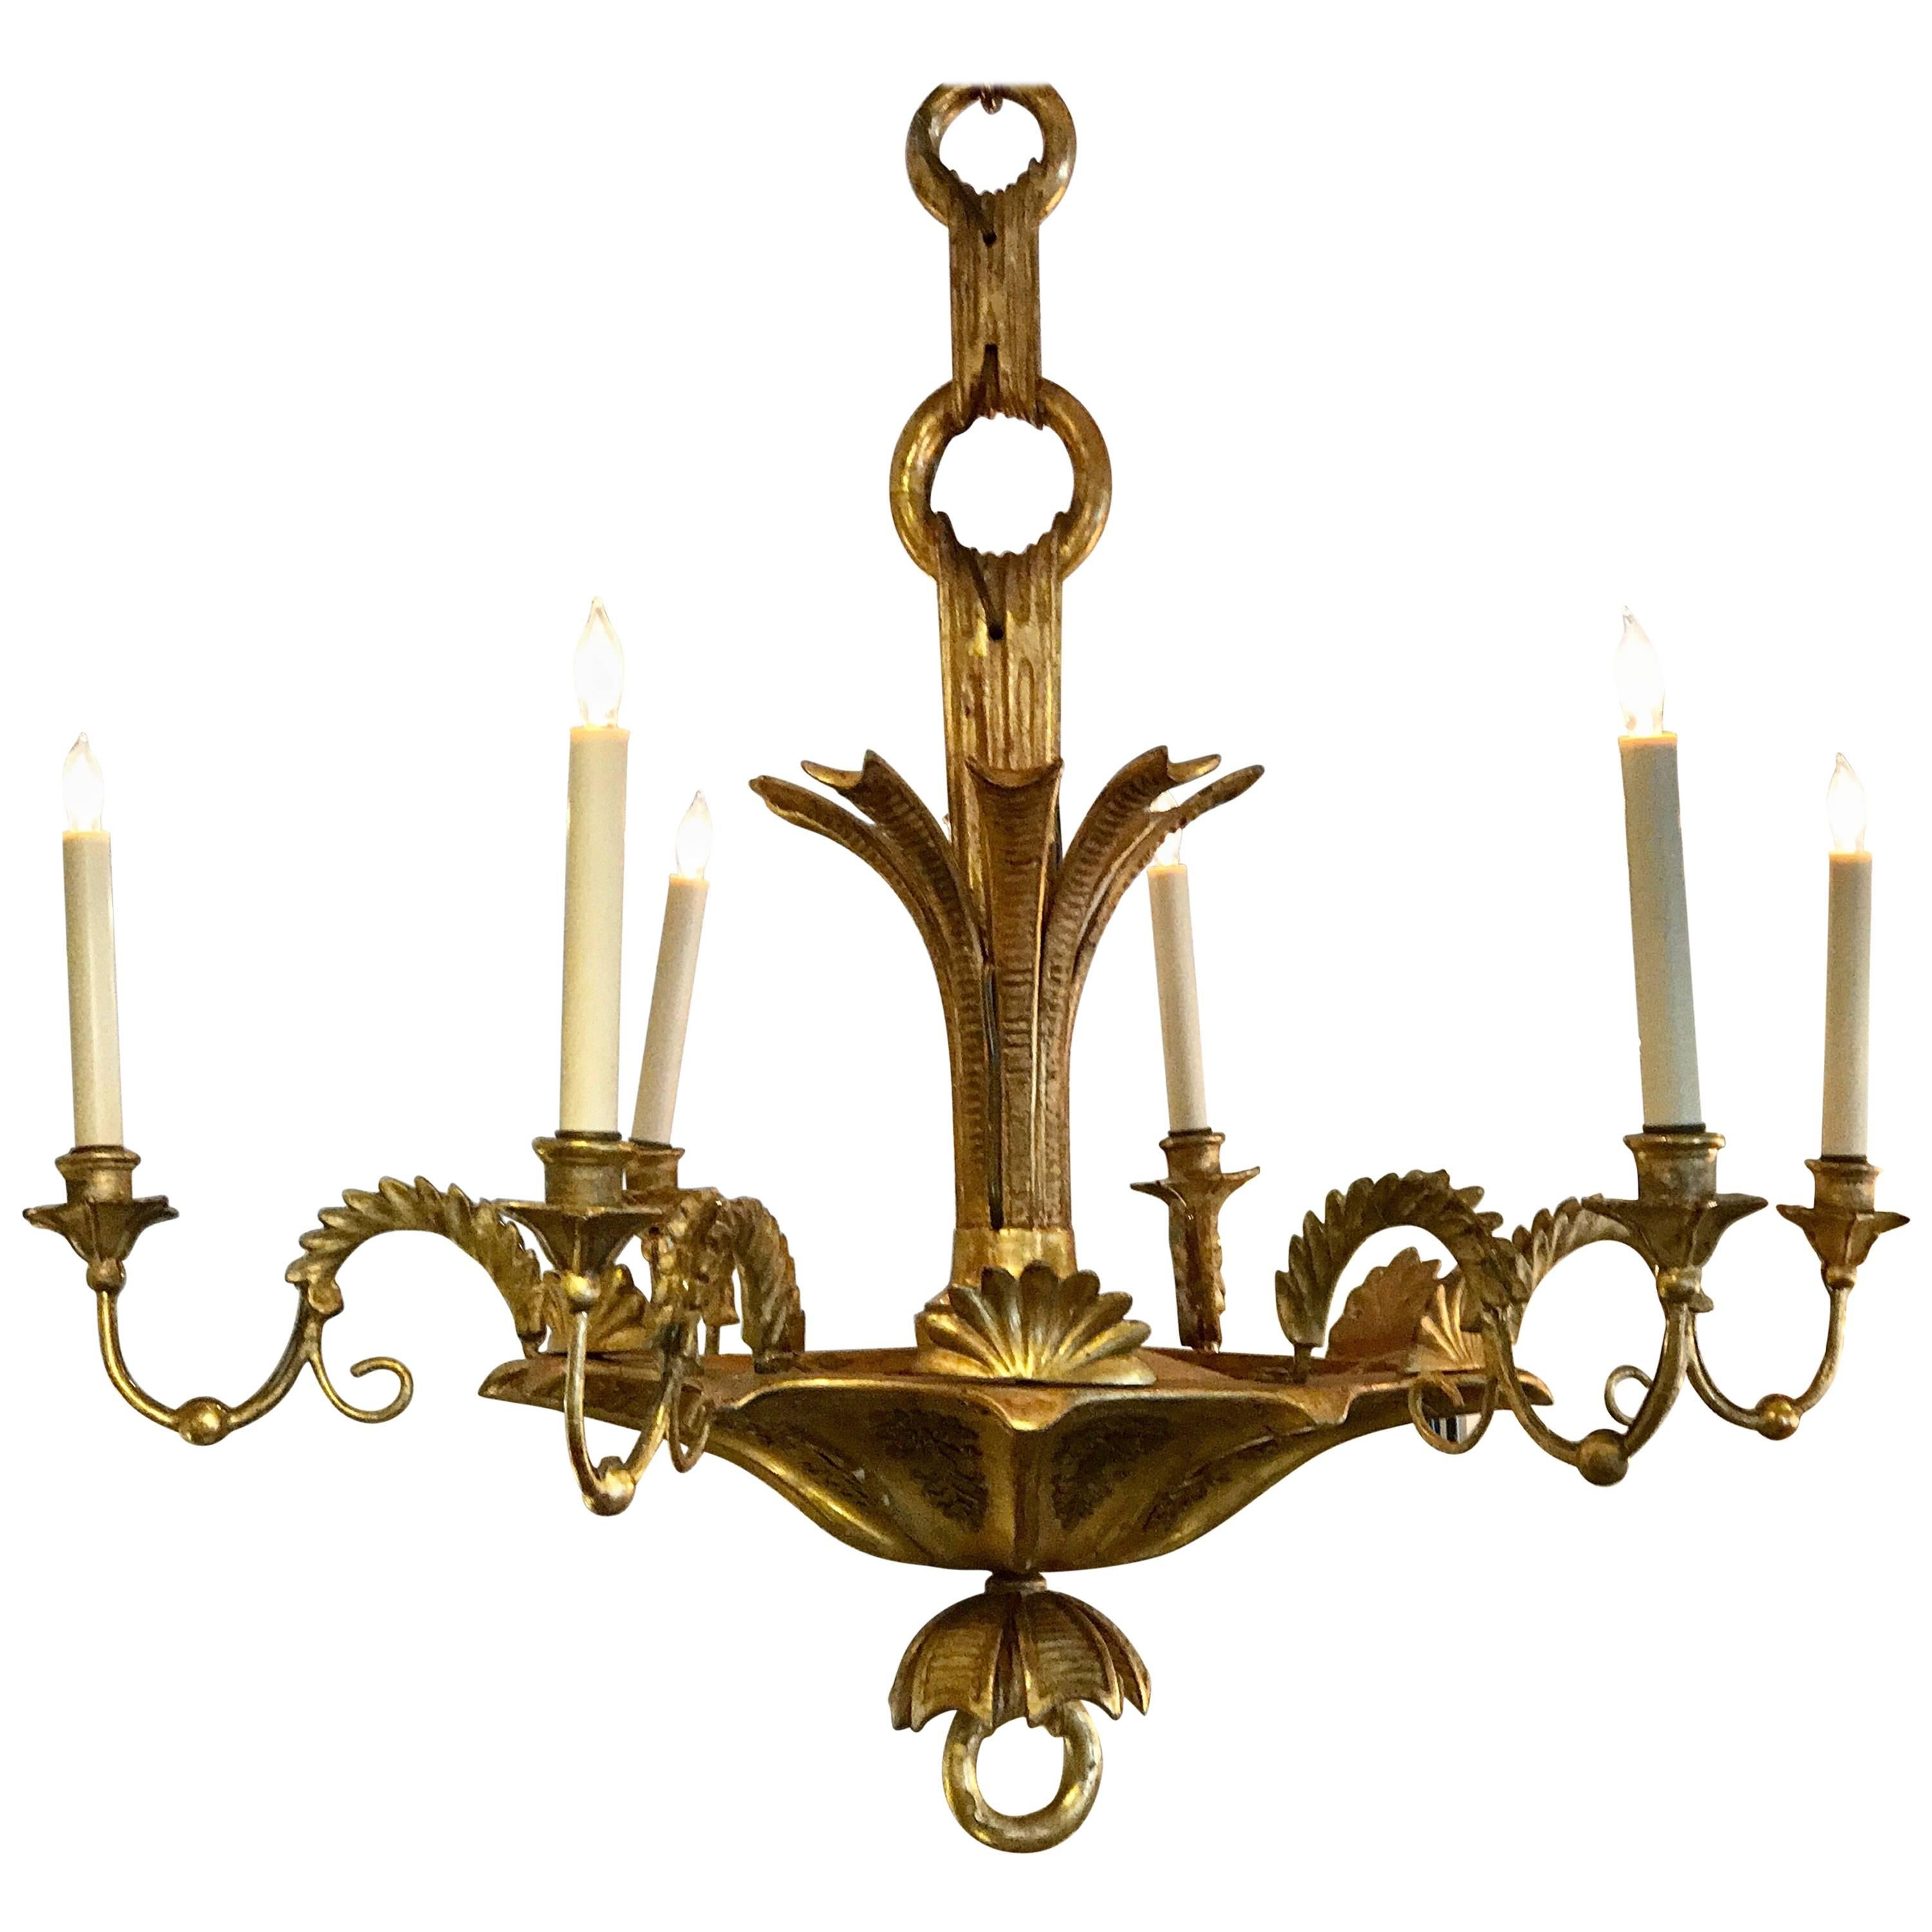 Antique Continental Giltwood Neoclassic Six-Light Chandelier